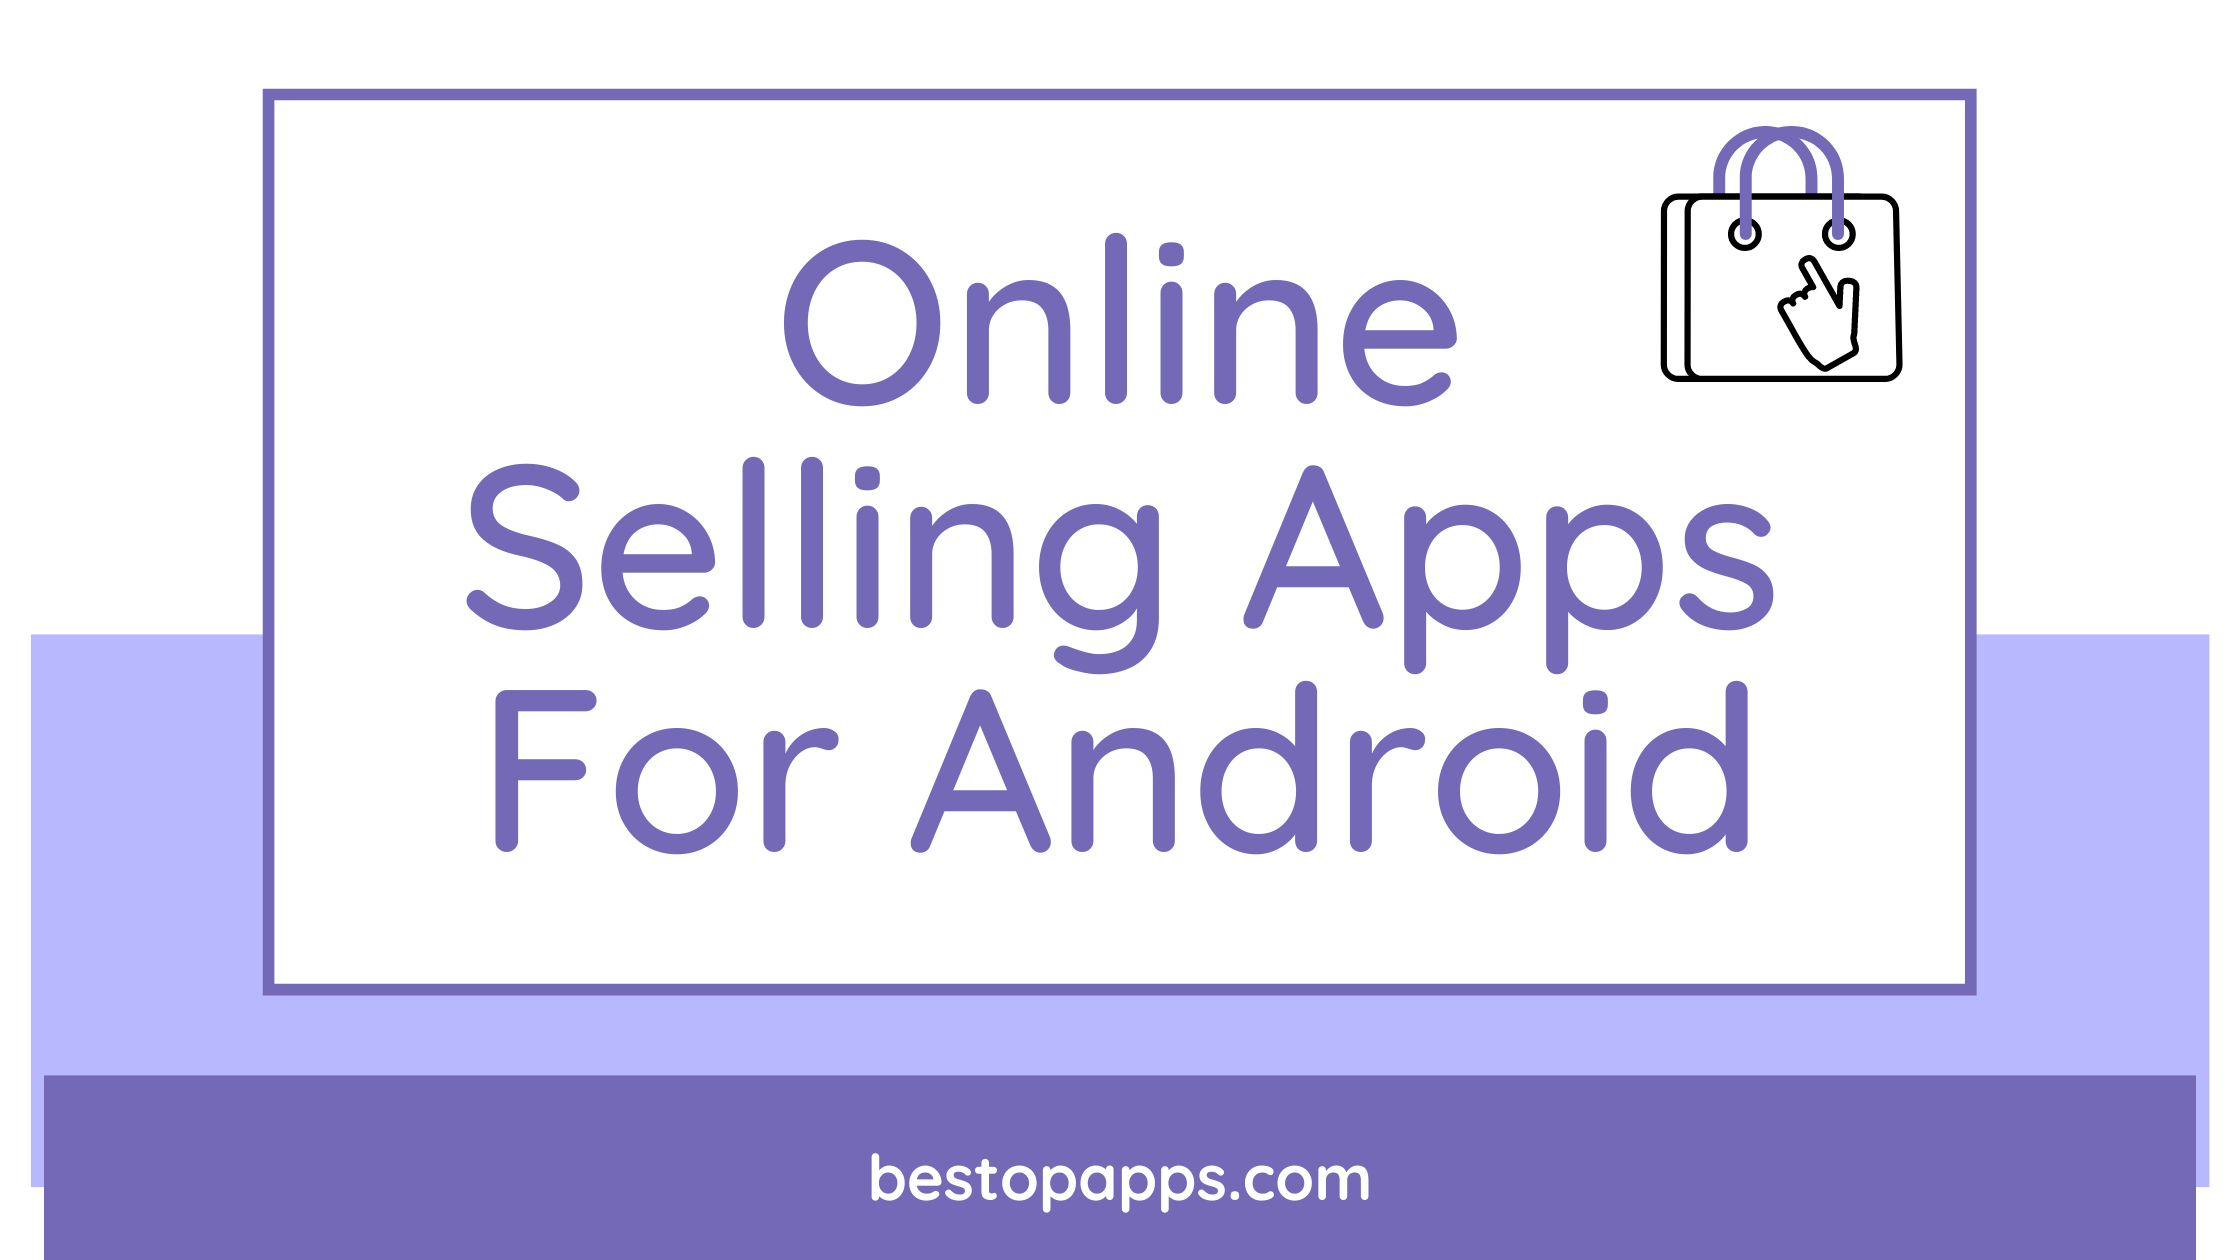 Online Selling Apps For Android